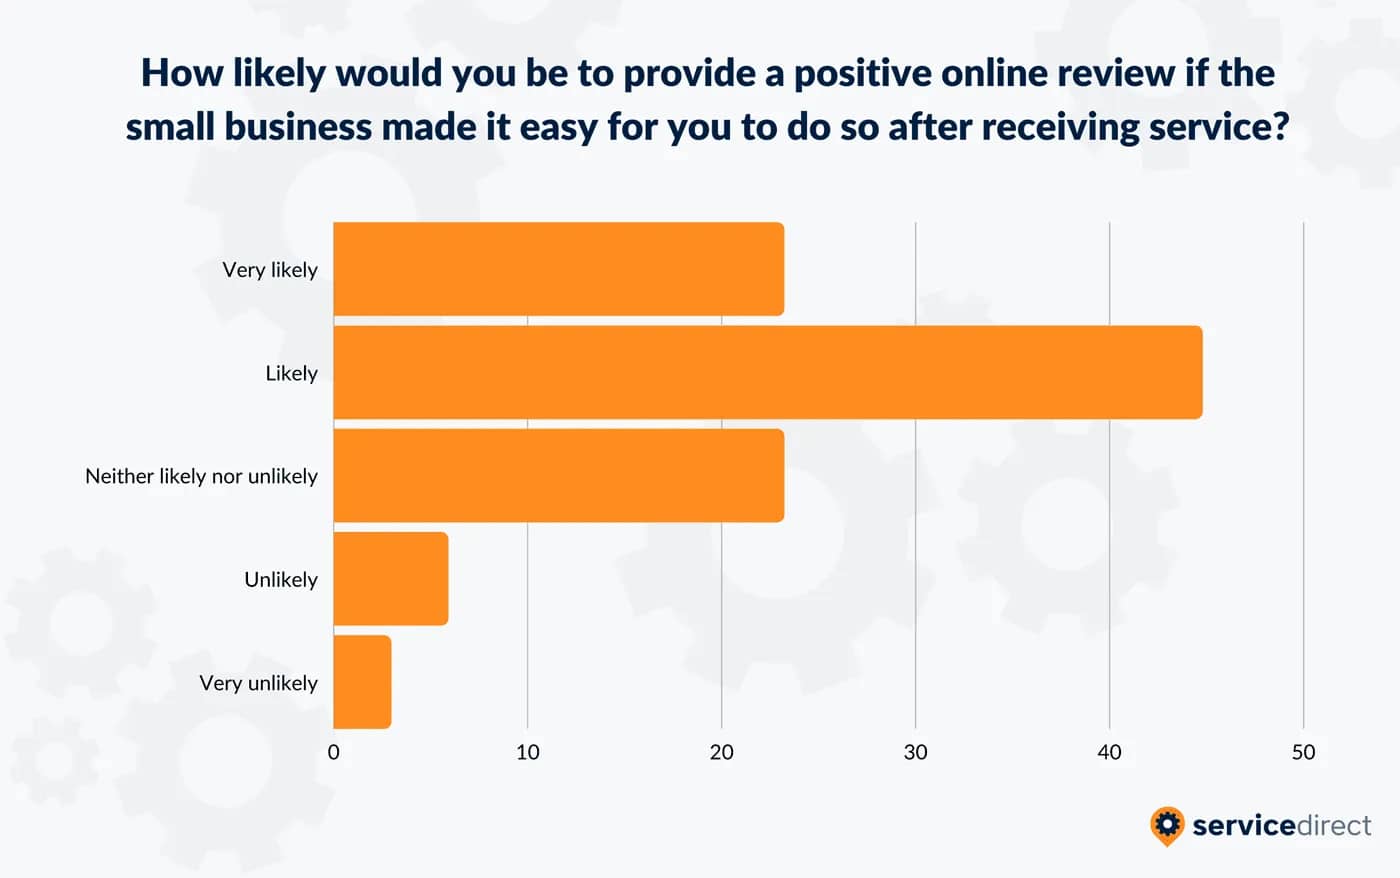 71% of consumers are likely to provide a positive review if a company makes it easy for them to do so